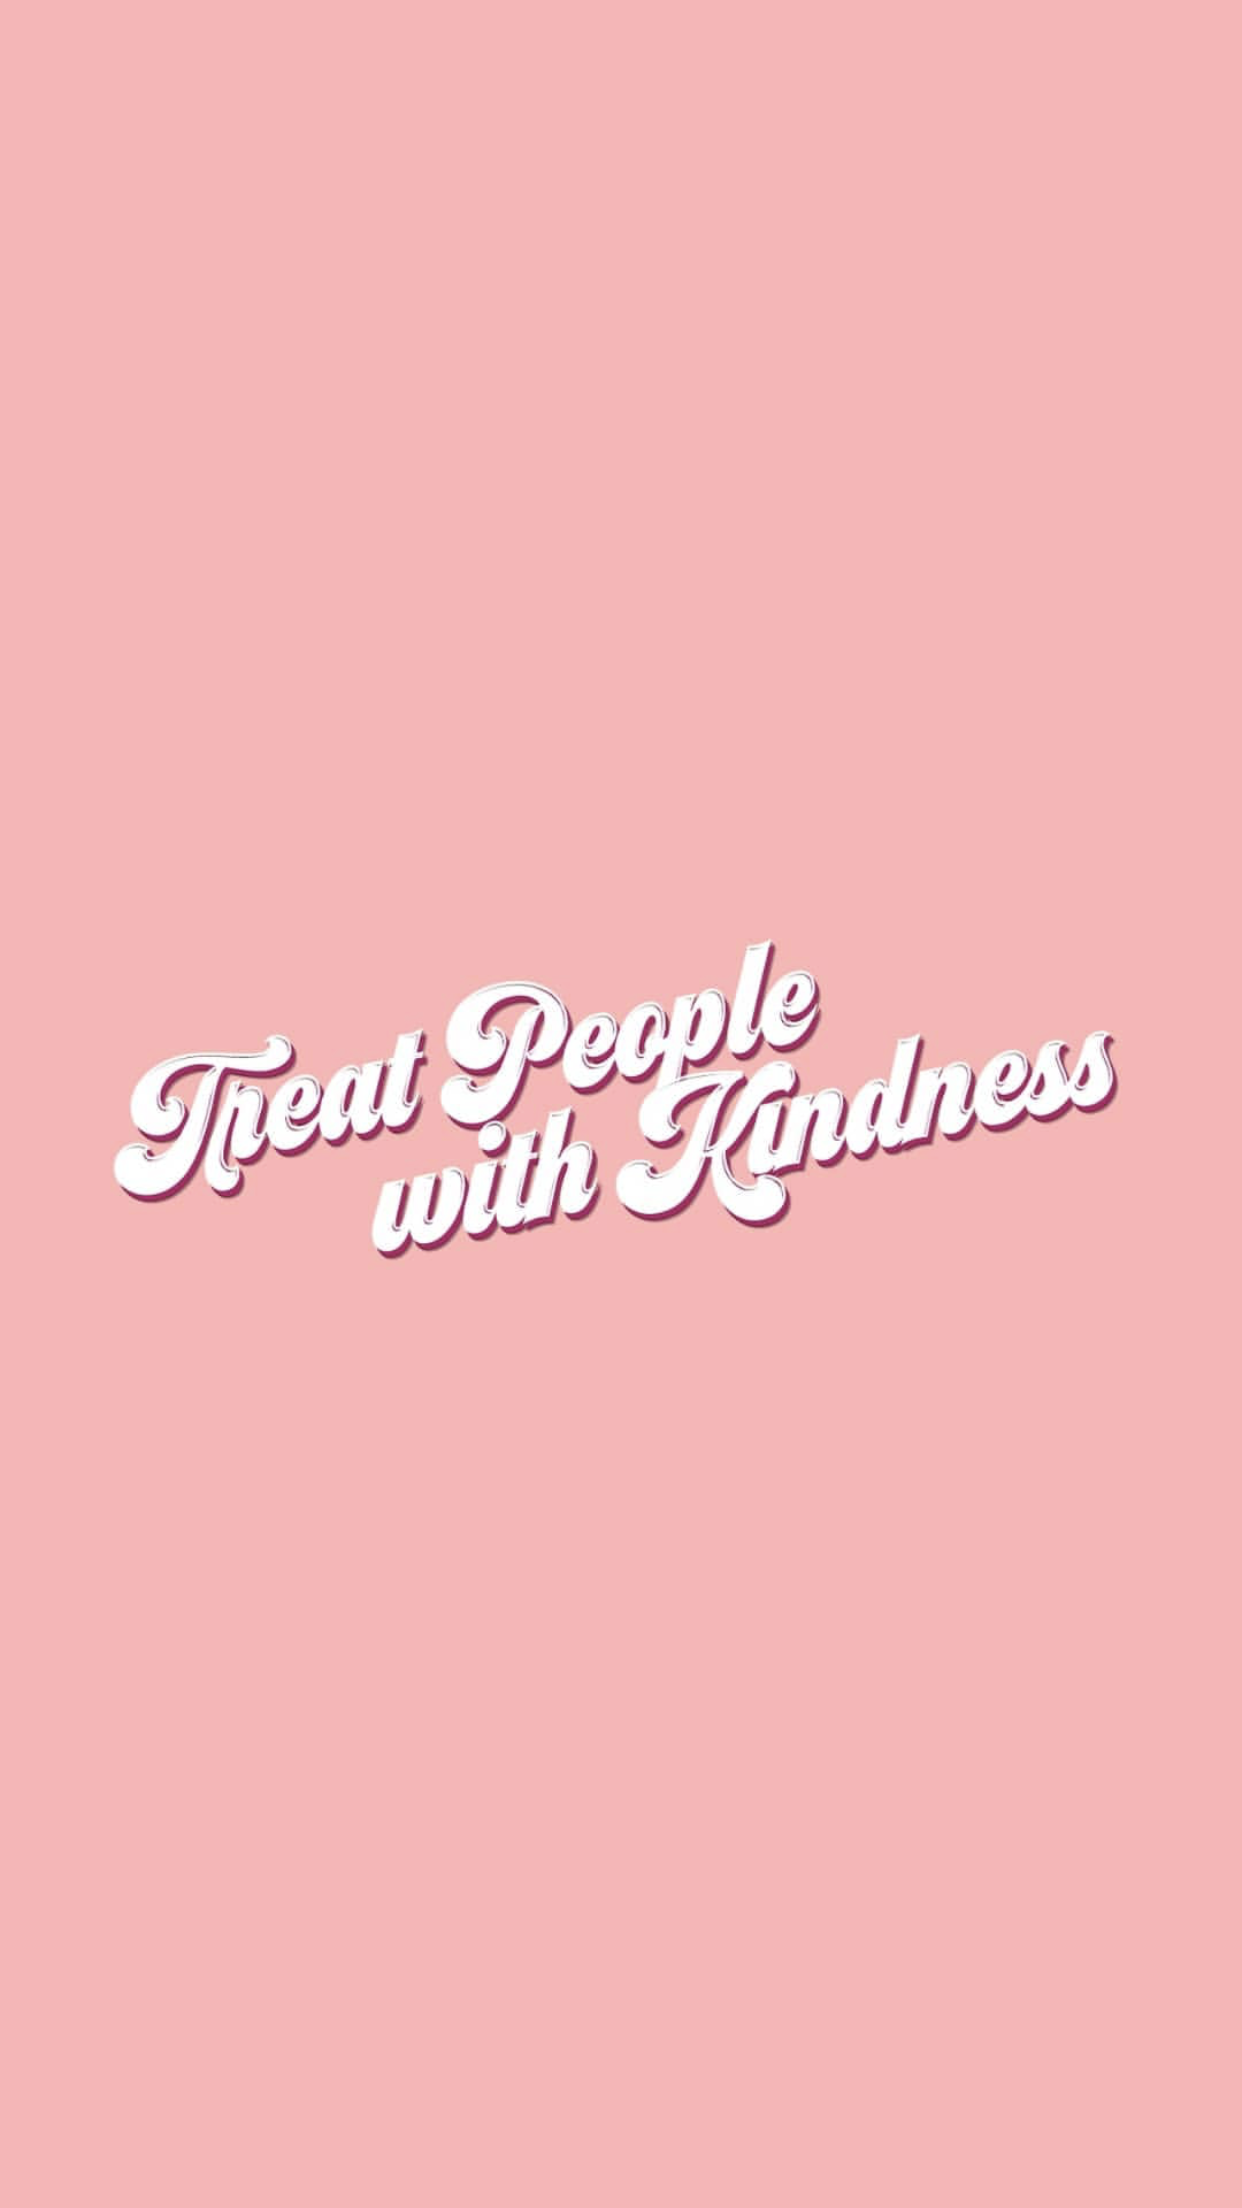 treat people with kindness quote lockscreen